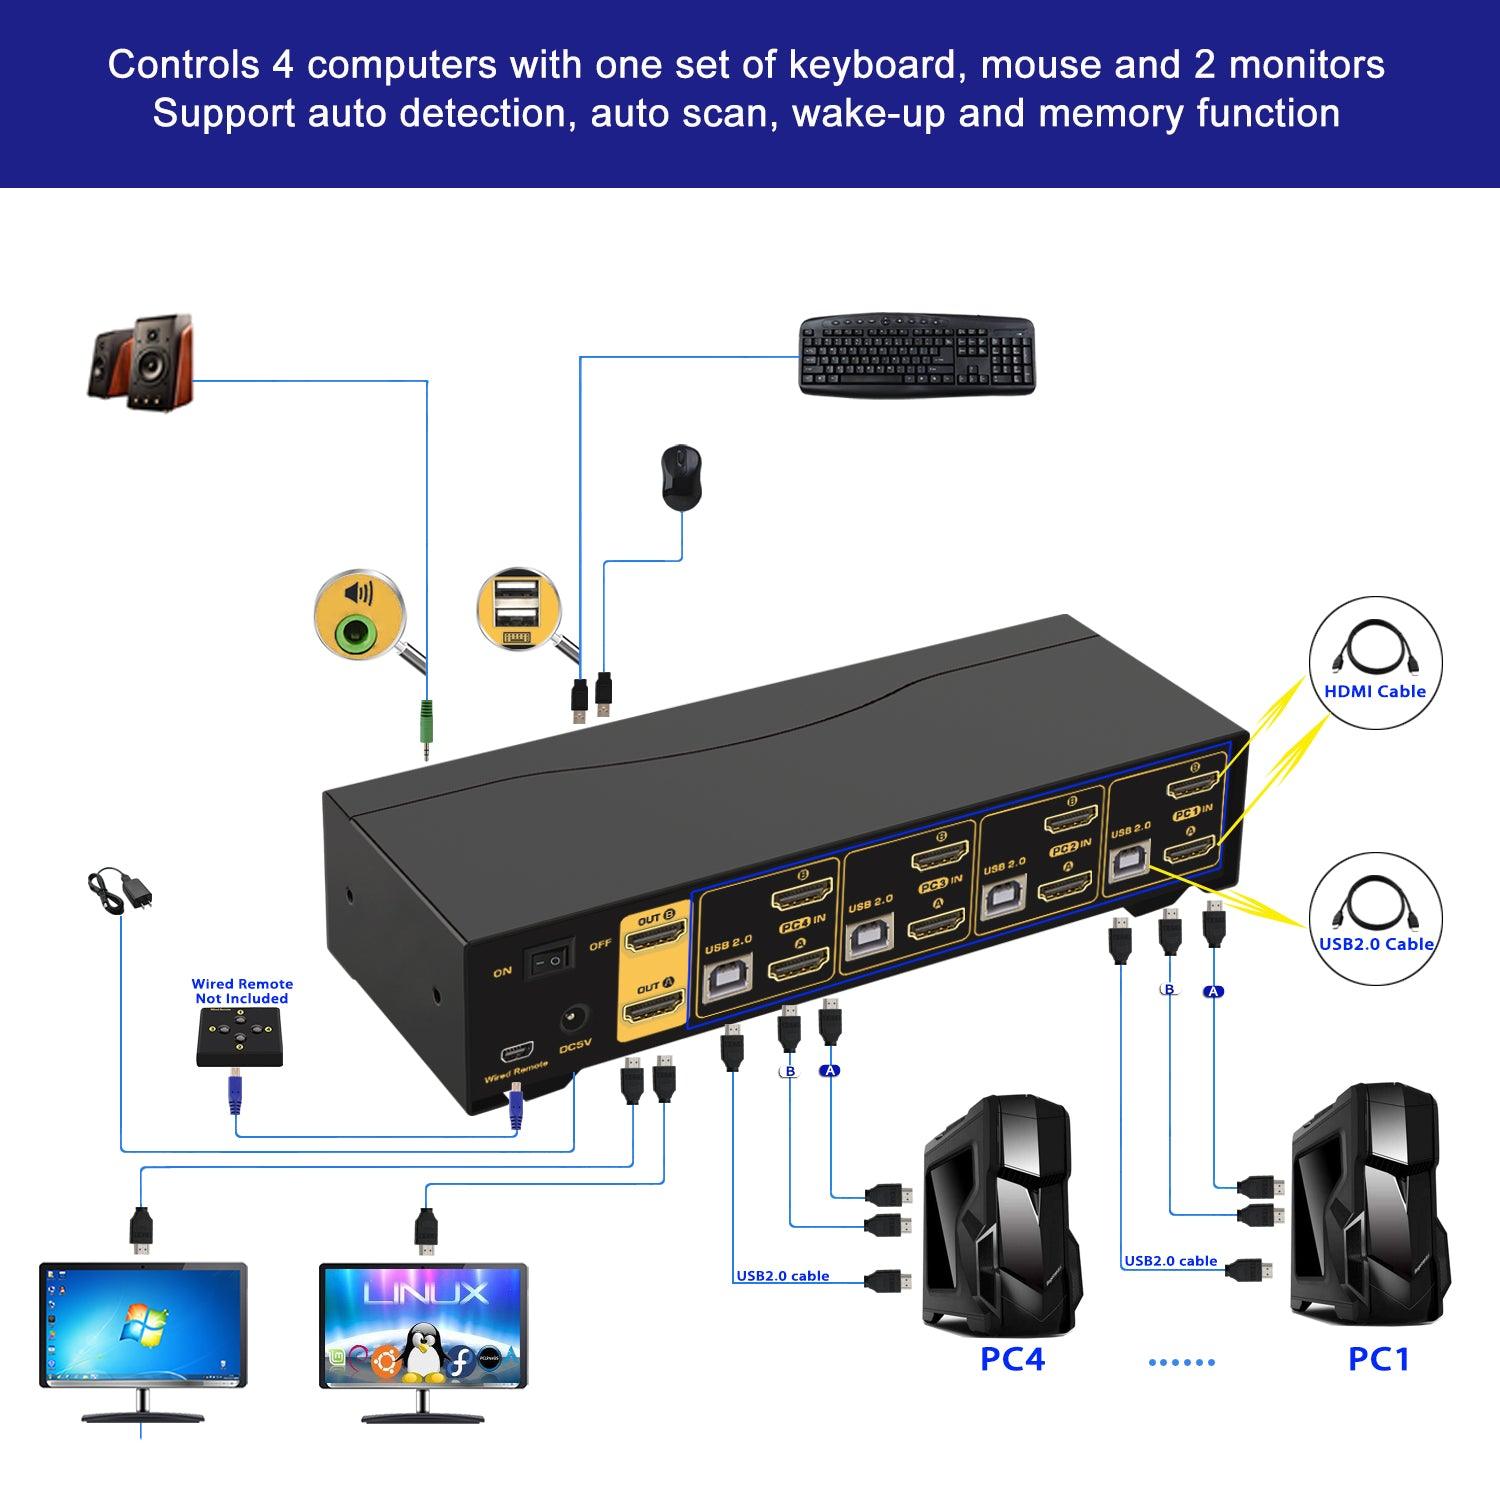 4 Port KVM Switch Dual Monitor HDMI 4K 60Hz for 4 Computers 2 Extended Display with Cables, No Extra USB 2.0 HUB, Supports YUV 4:4:4, HDCP 1.4, HDR 10, EDID, Audio, Hotkey 942HUA-1A - CKL KVM Switches